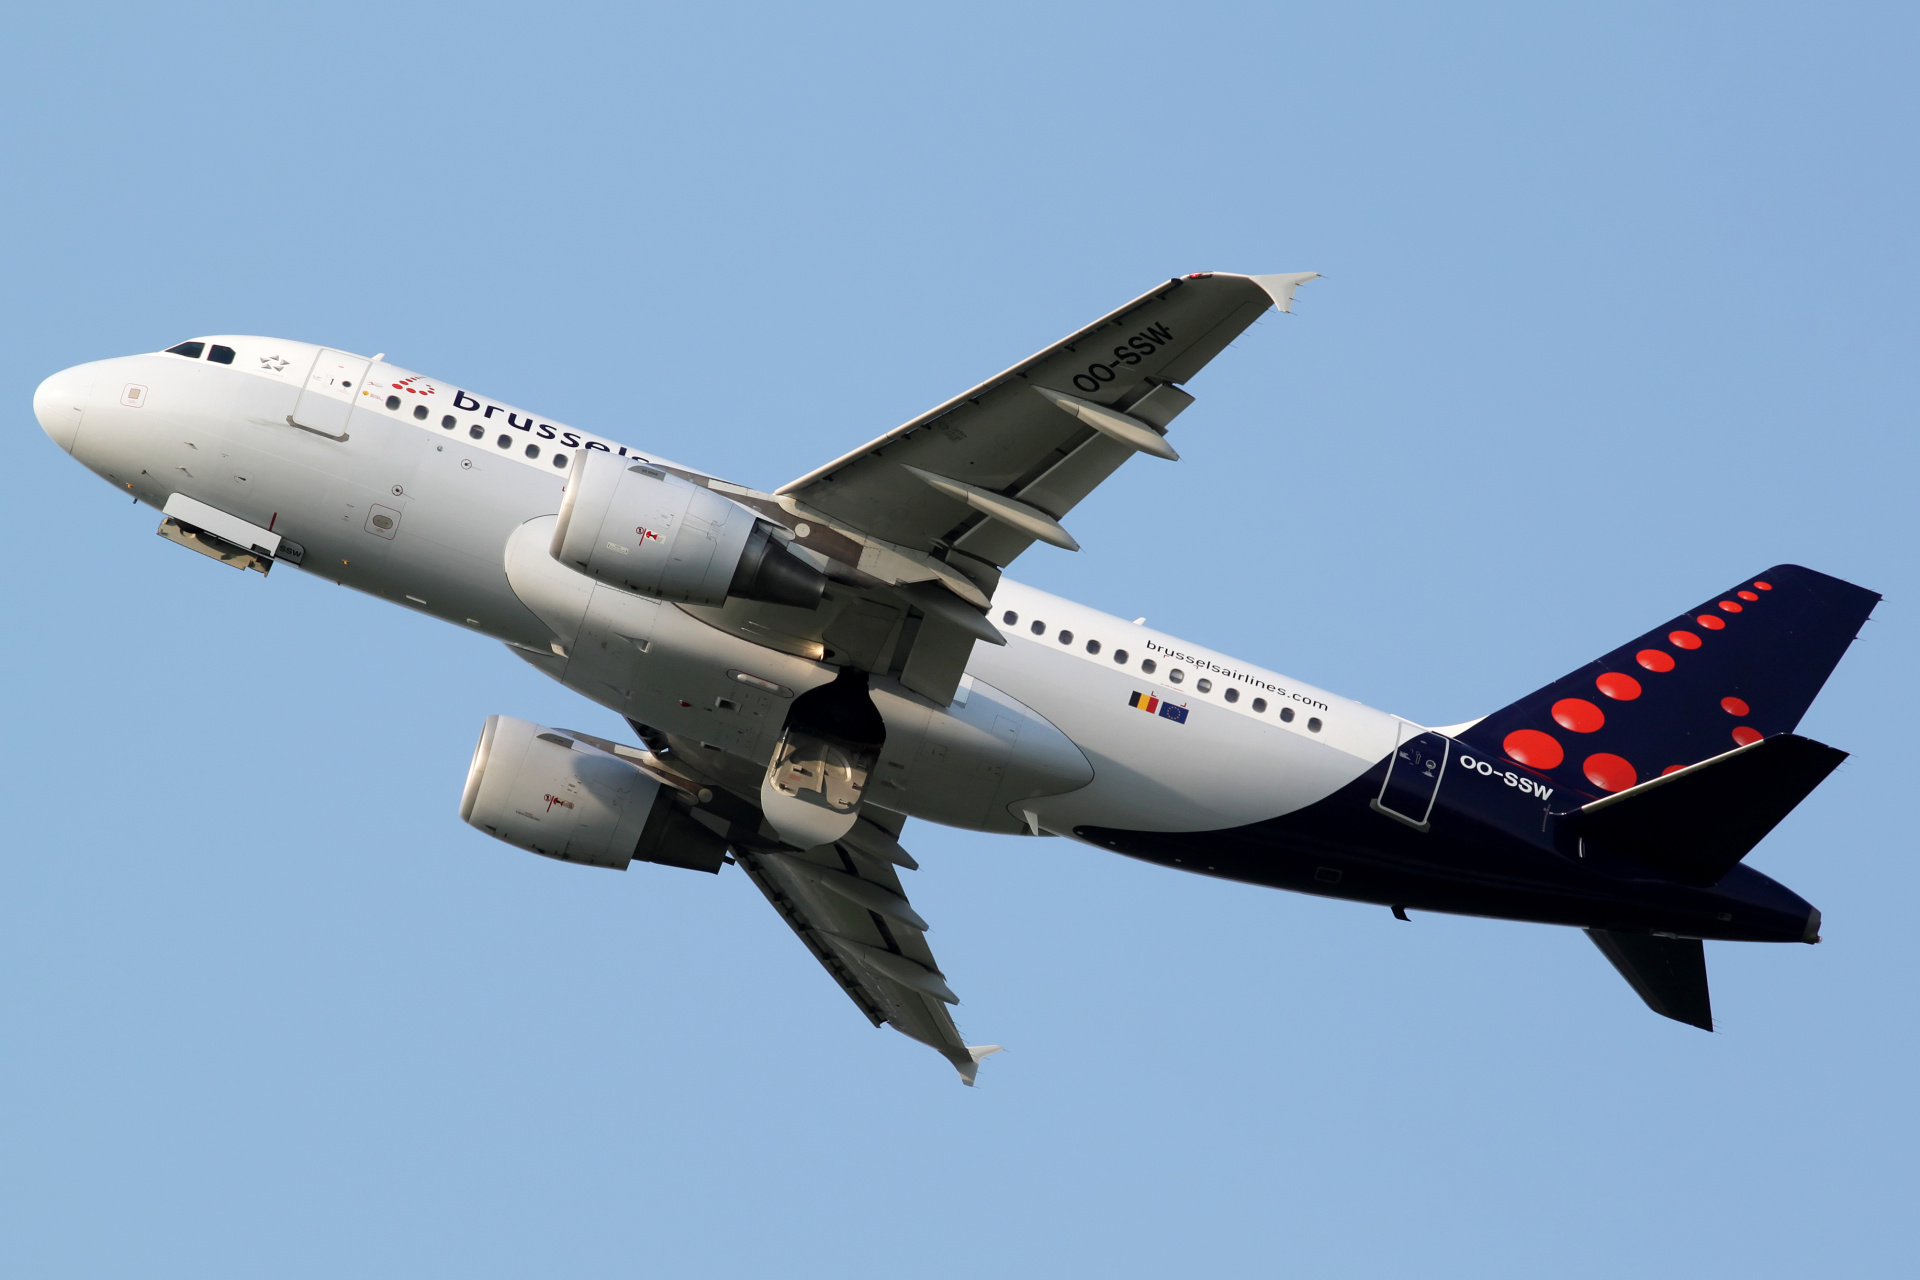 OO-SSW (Aircraft » EPWA Spotting » Airbus A319-100 » Brussels Airlines)